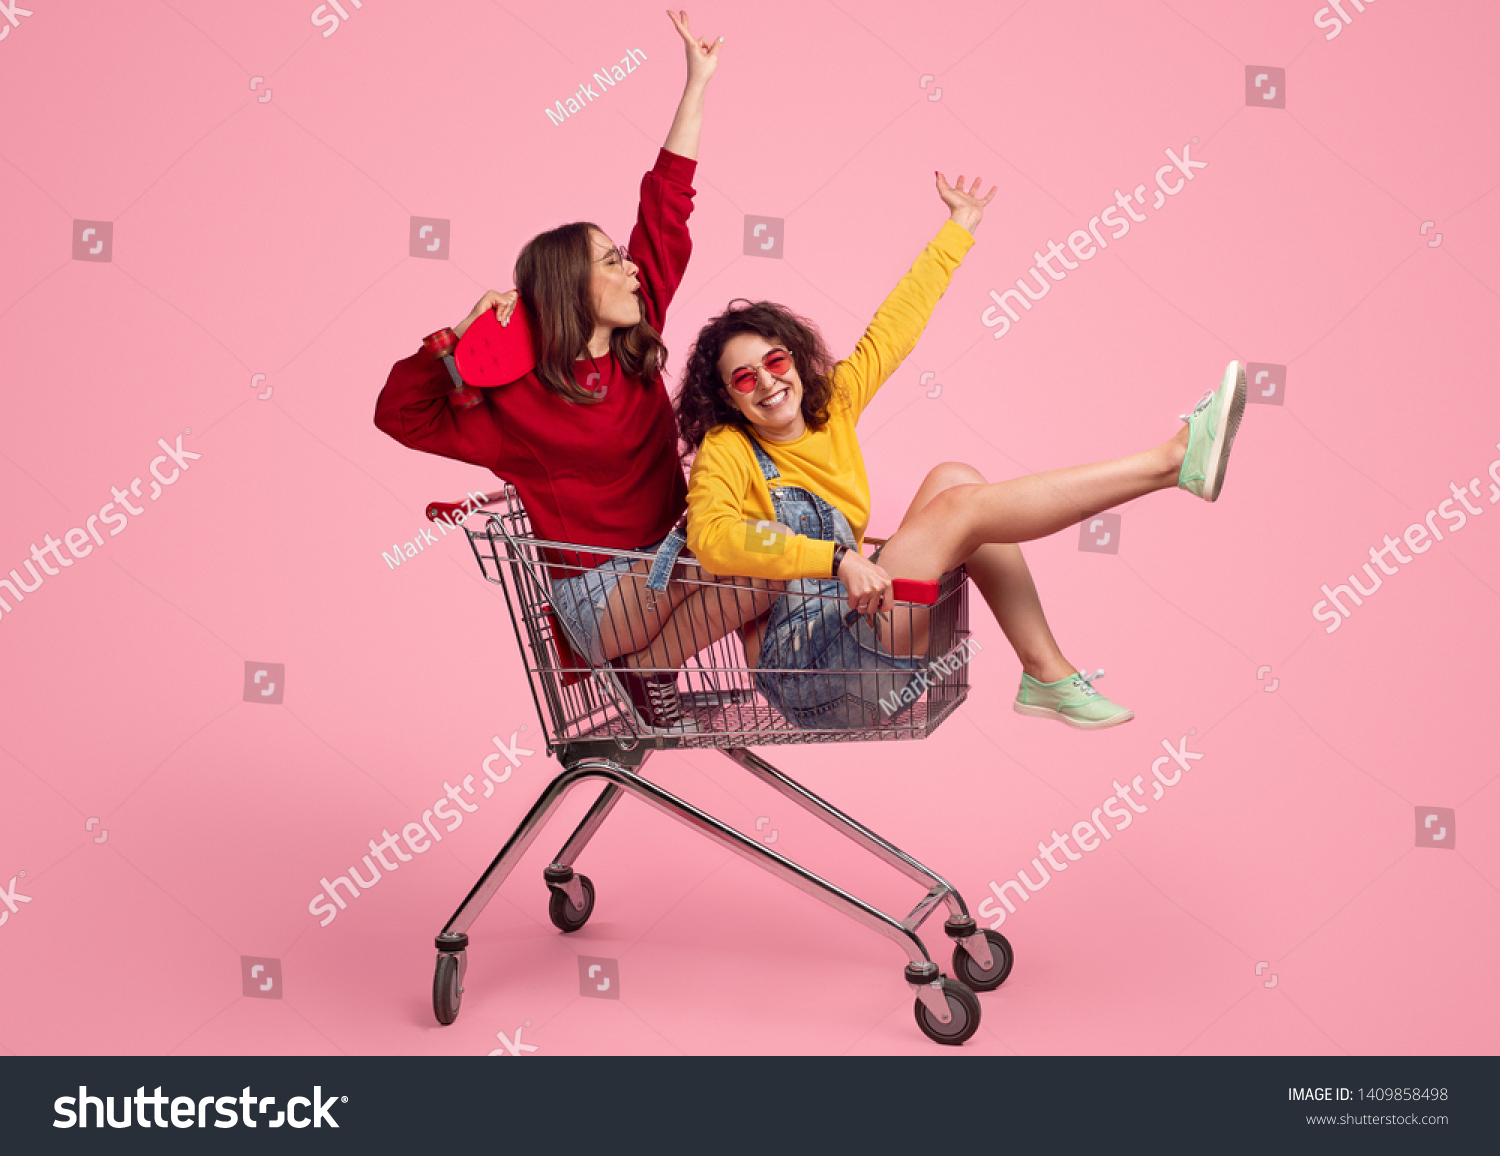 Side view of excited young friends smiling and raising hands while riding shopping trolley against pink background #1409858498